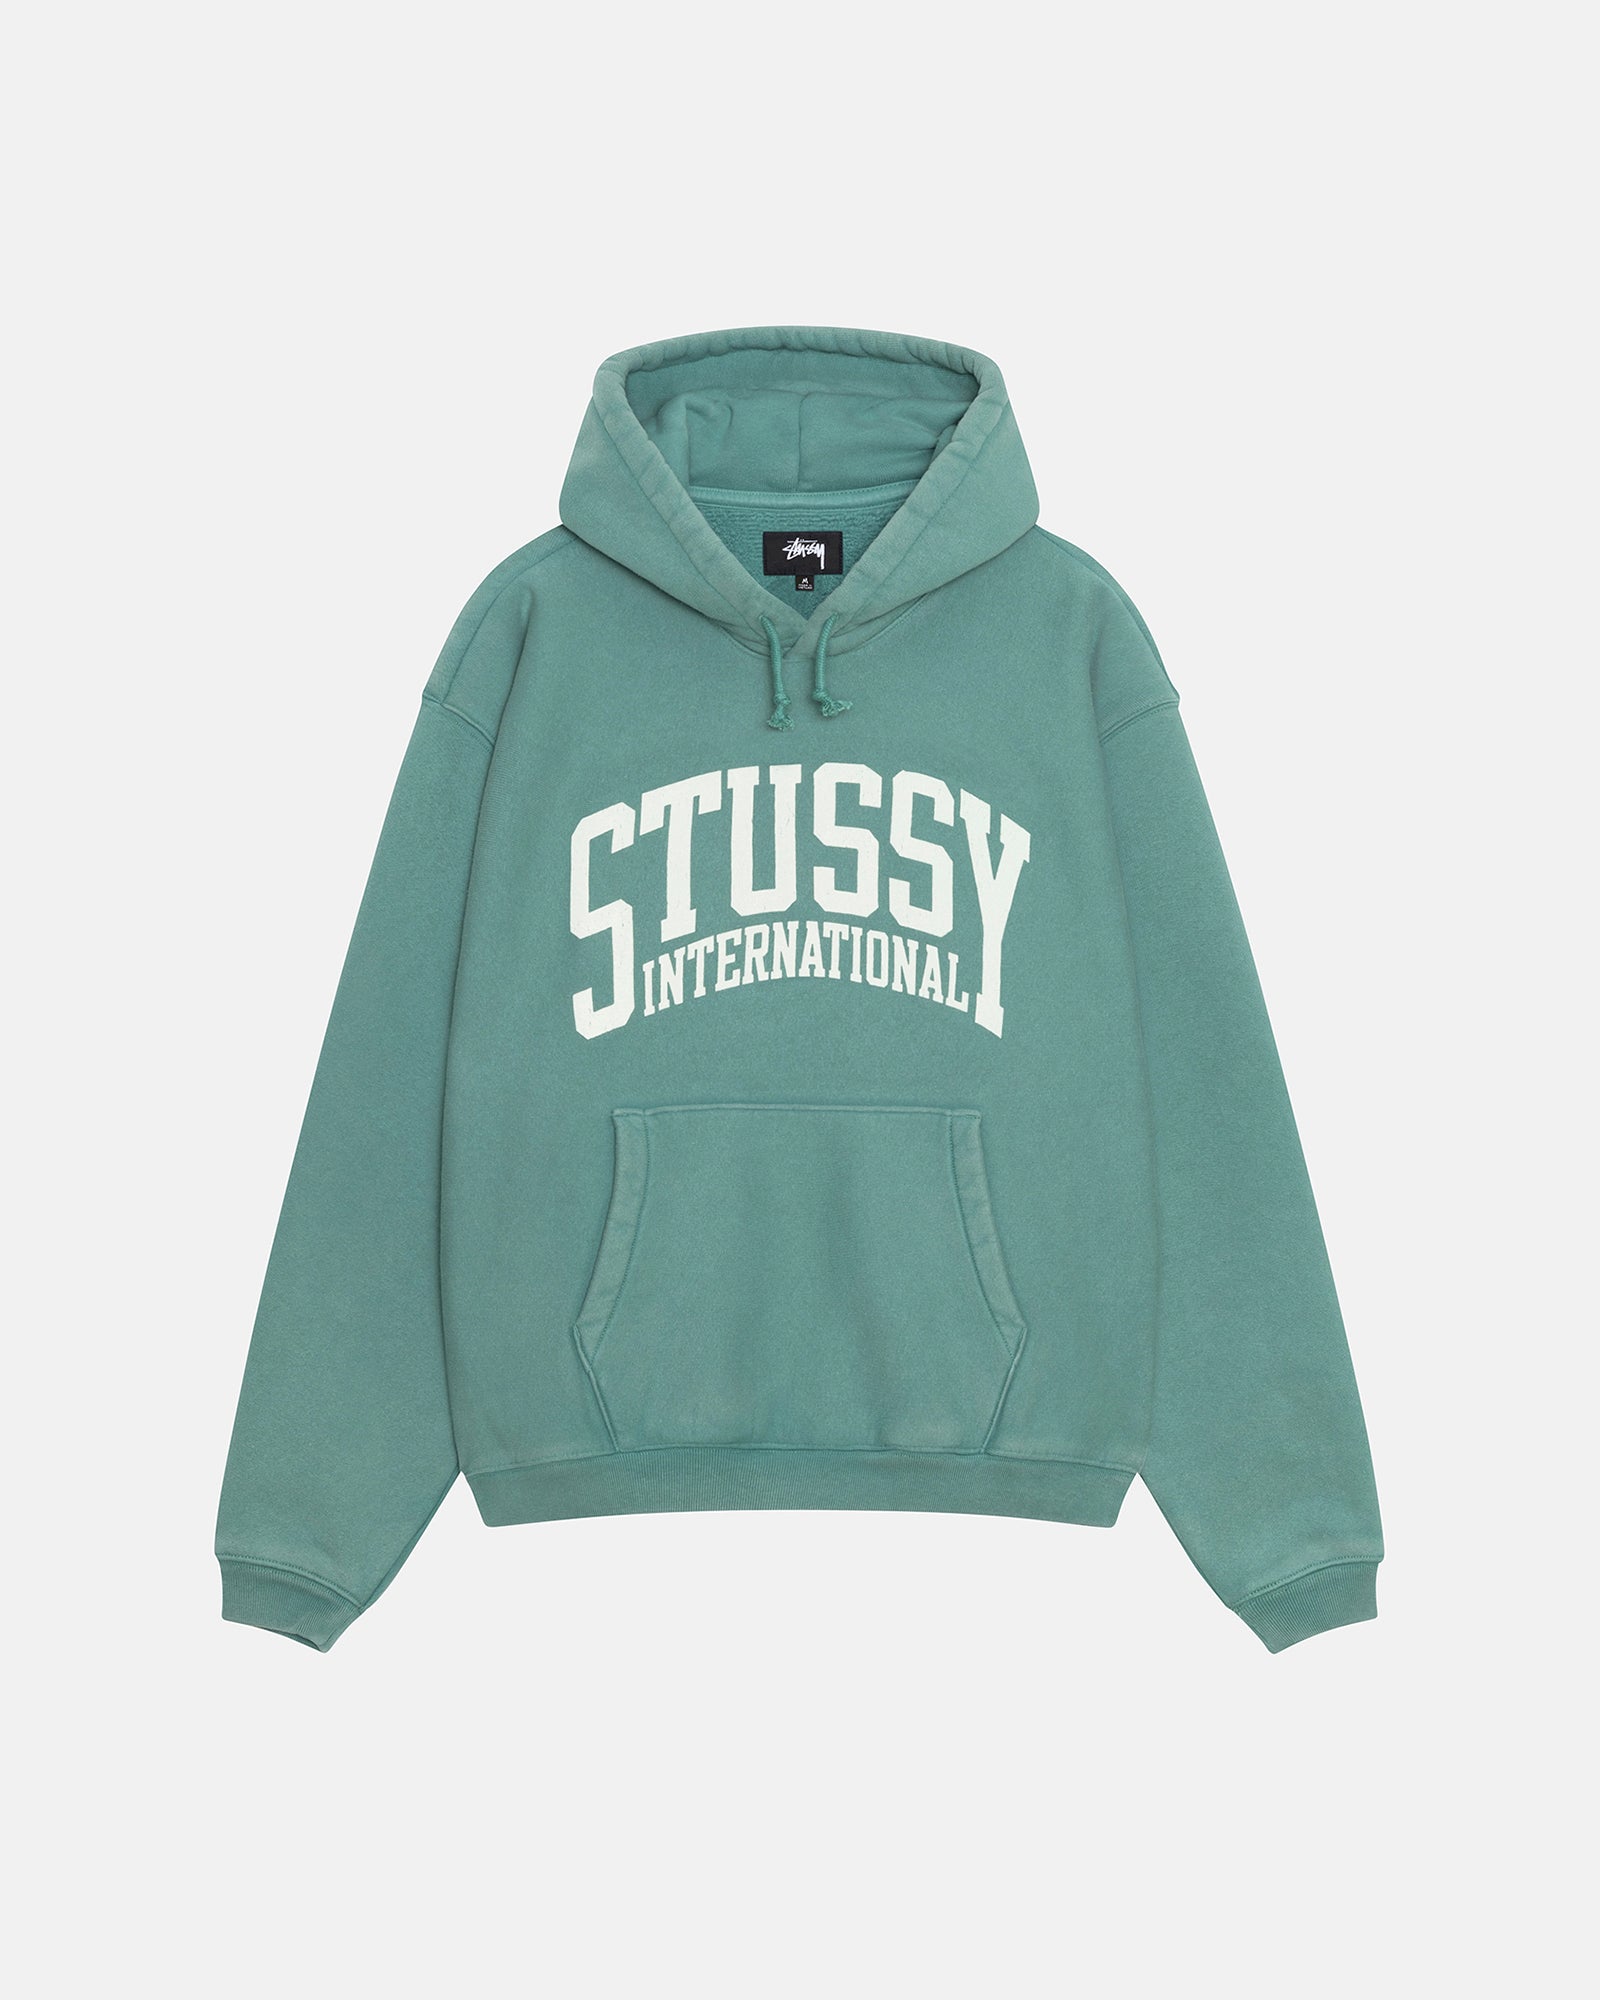 Shop all – Stüssy Europe – Page 3